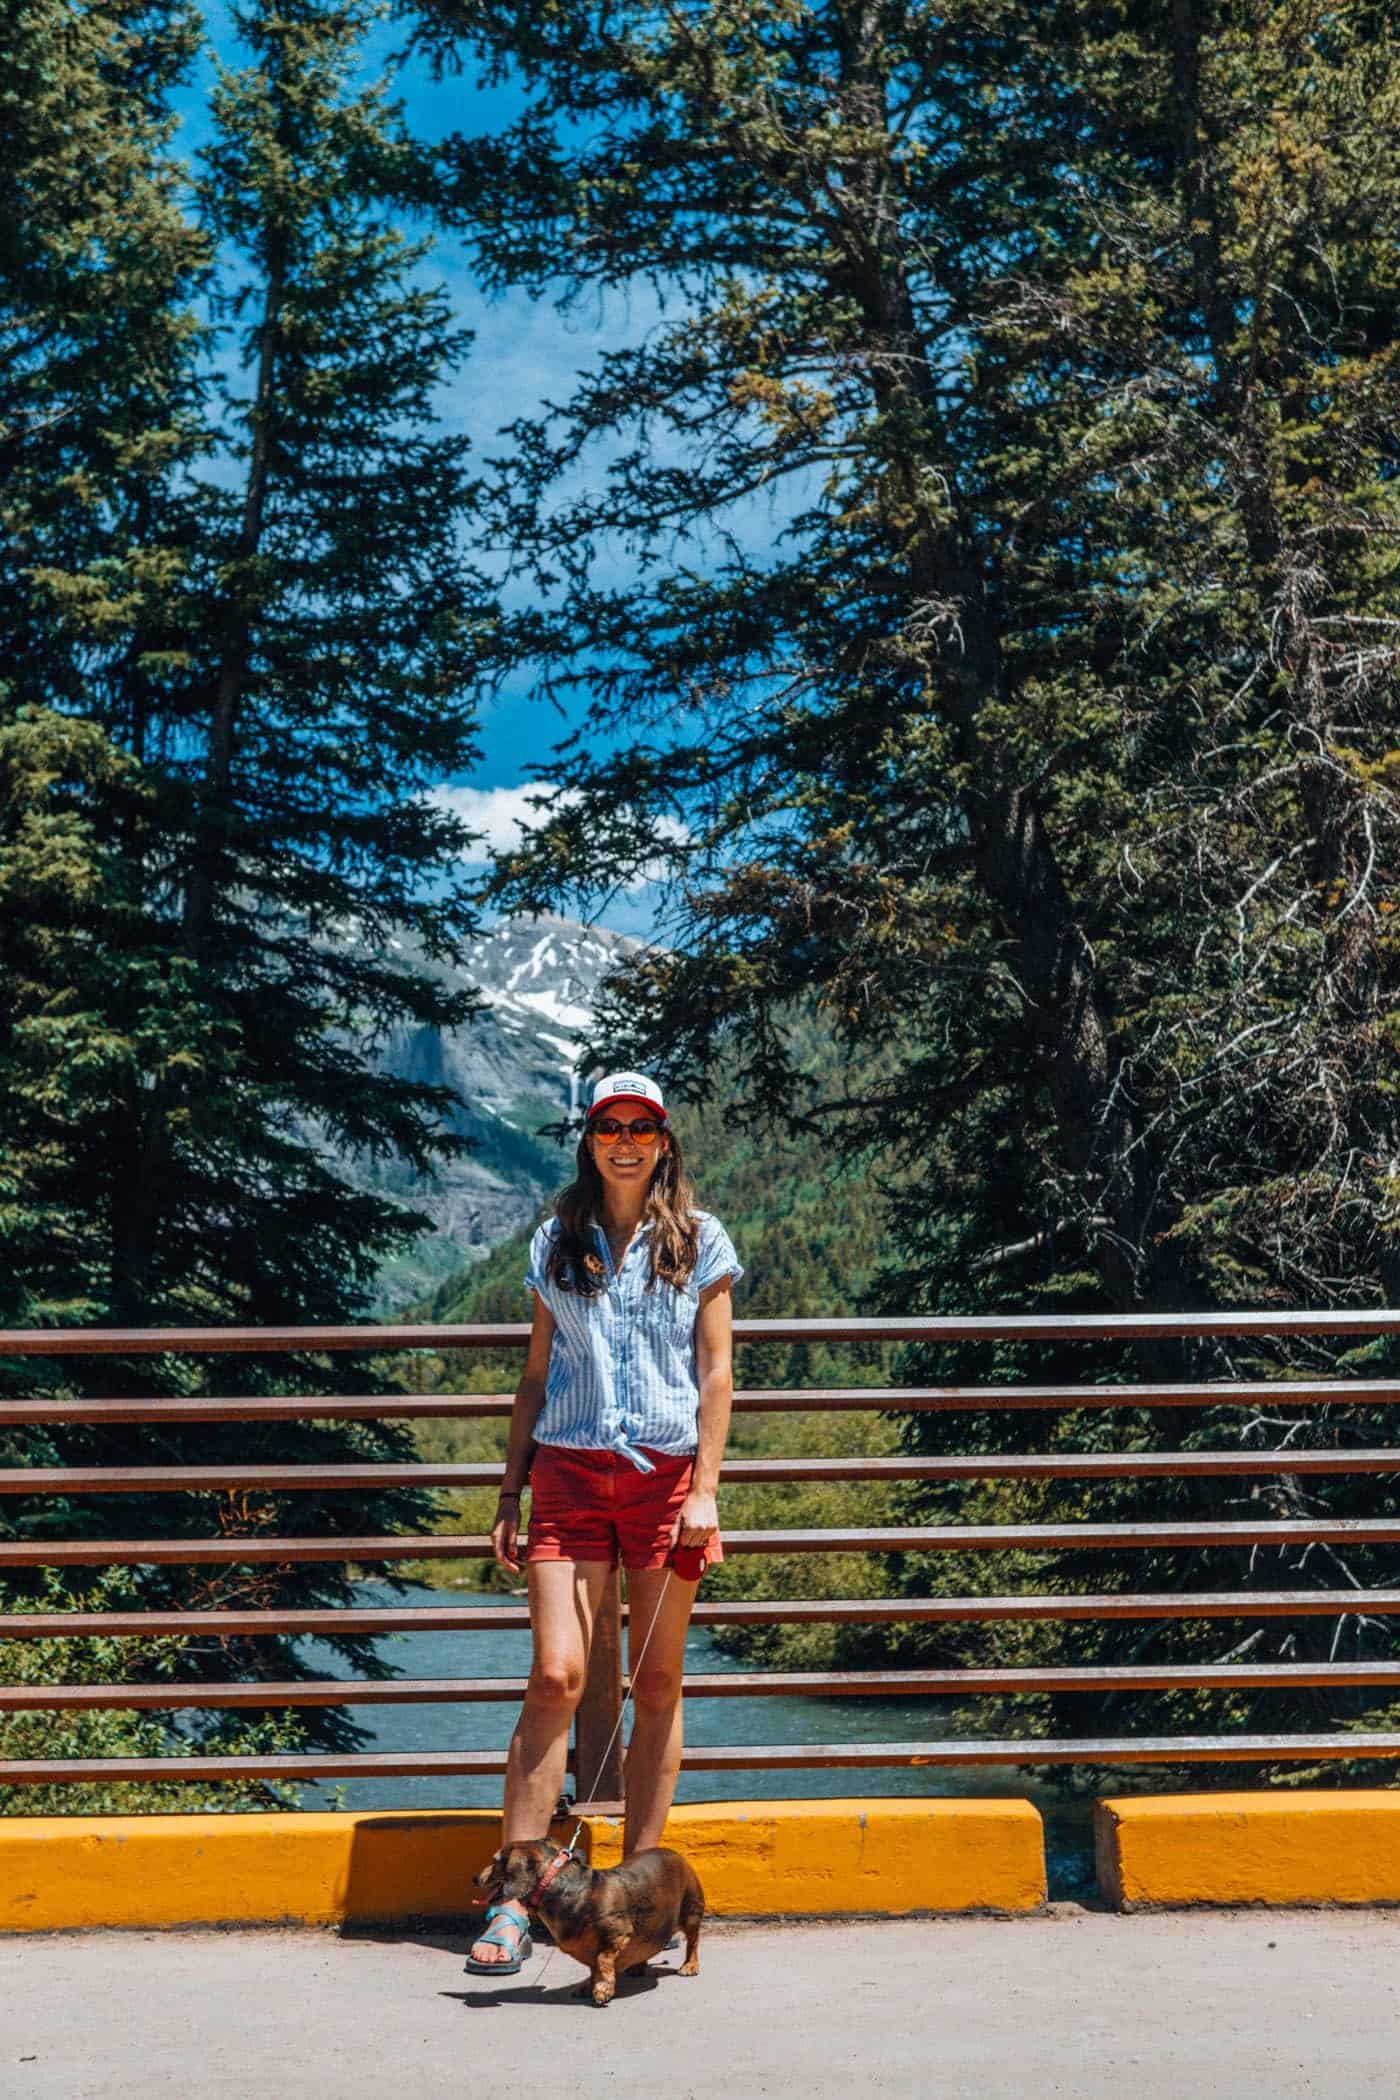 Telluride Guide - Where to Hike, Eat & Drink